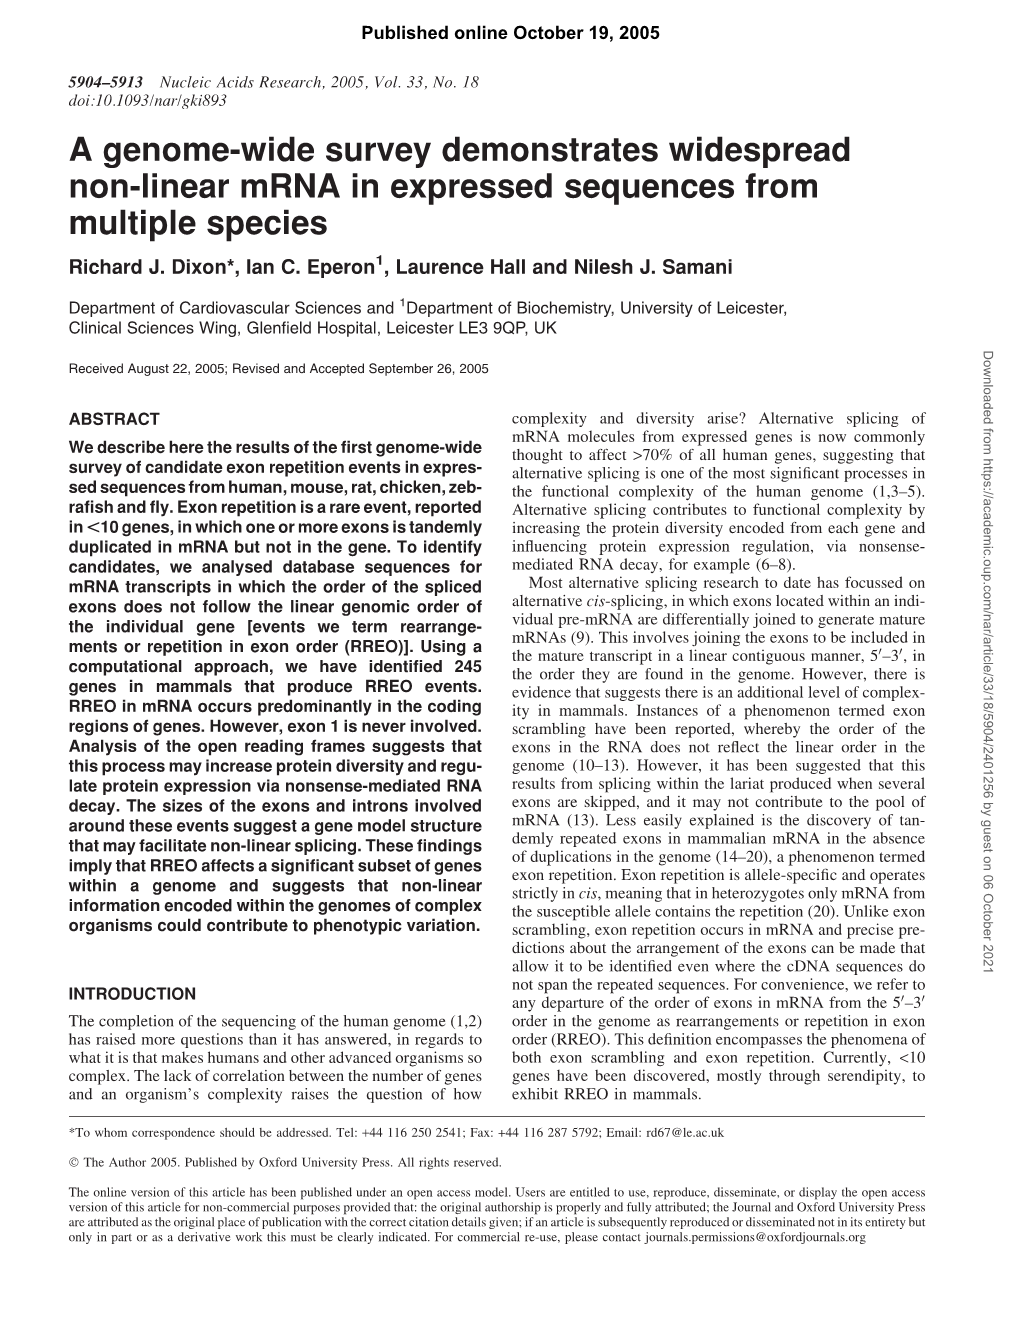 A Genome-Wide Survey Demonstrates Widespread Non-Linear Mrna in Expressed Sequences from Multiple Species Richard J